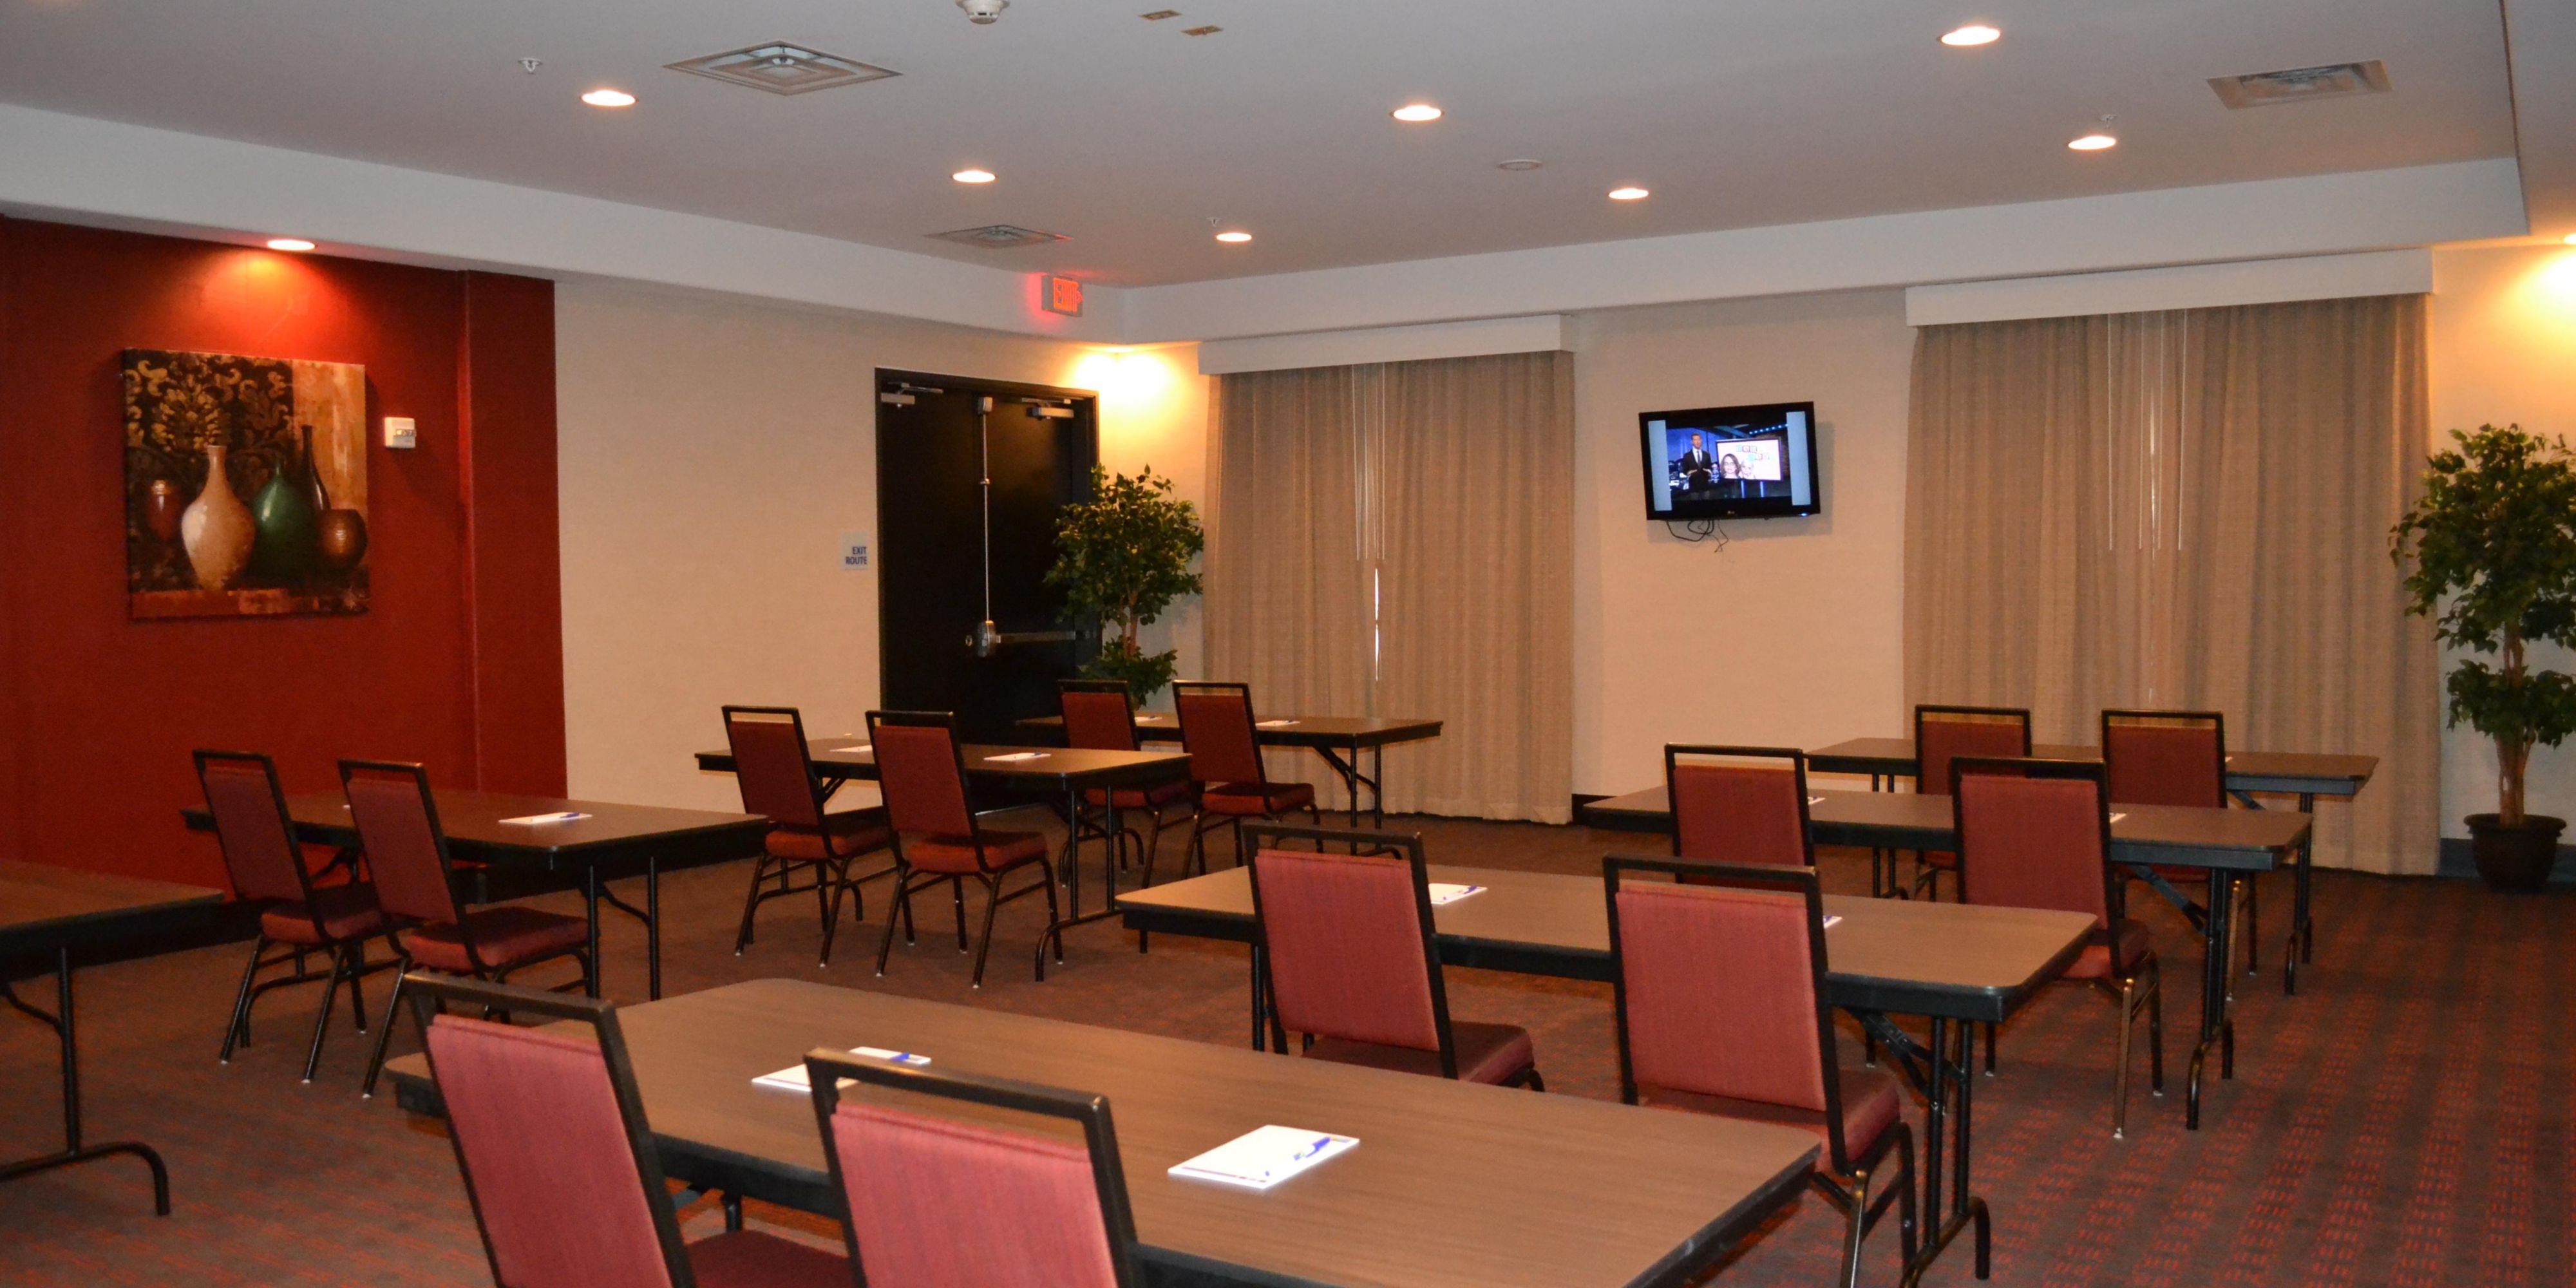 Whether you are planning a classroom setting event for up to 40 or a smaller boardroom style meeting for up to 10, we have you covered!  Call us for your meeting needs.